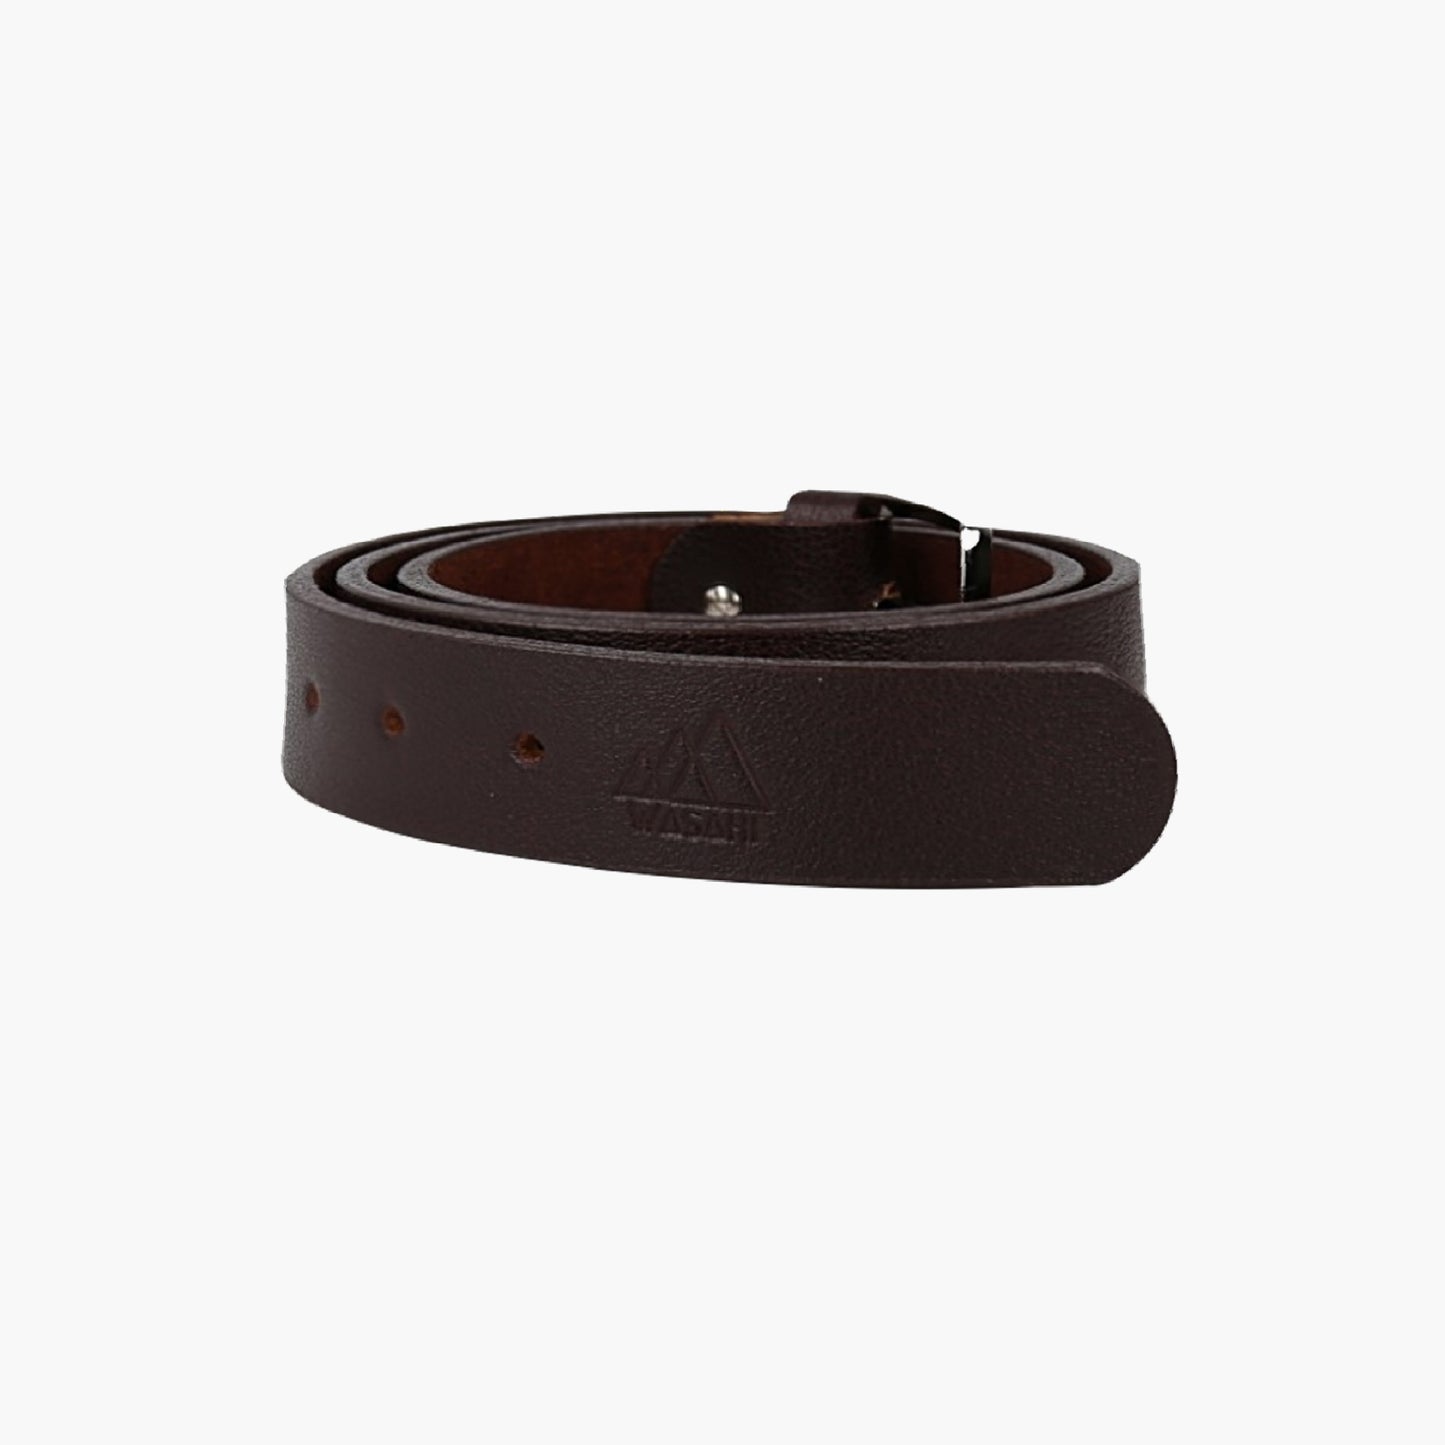 The One® Slim Leather Belt - Brown